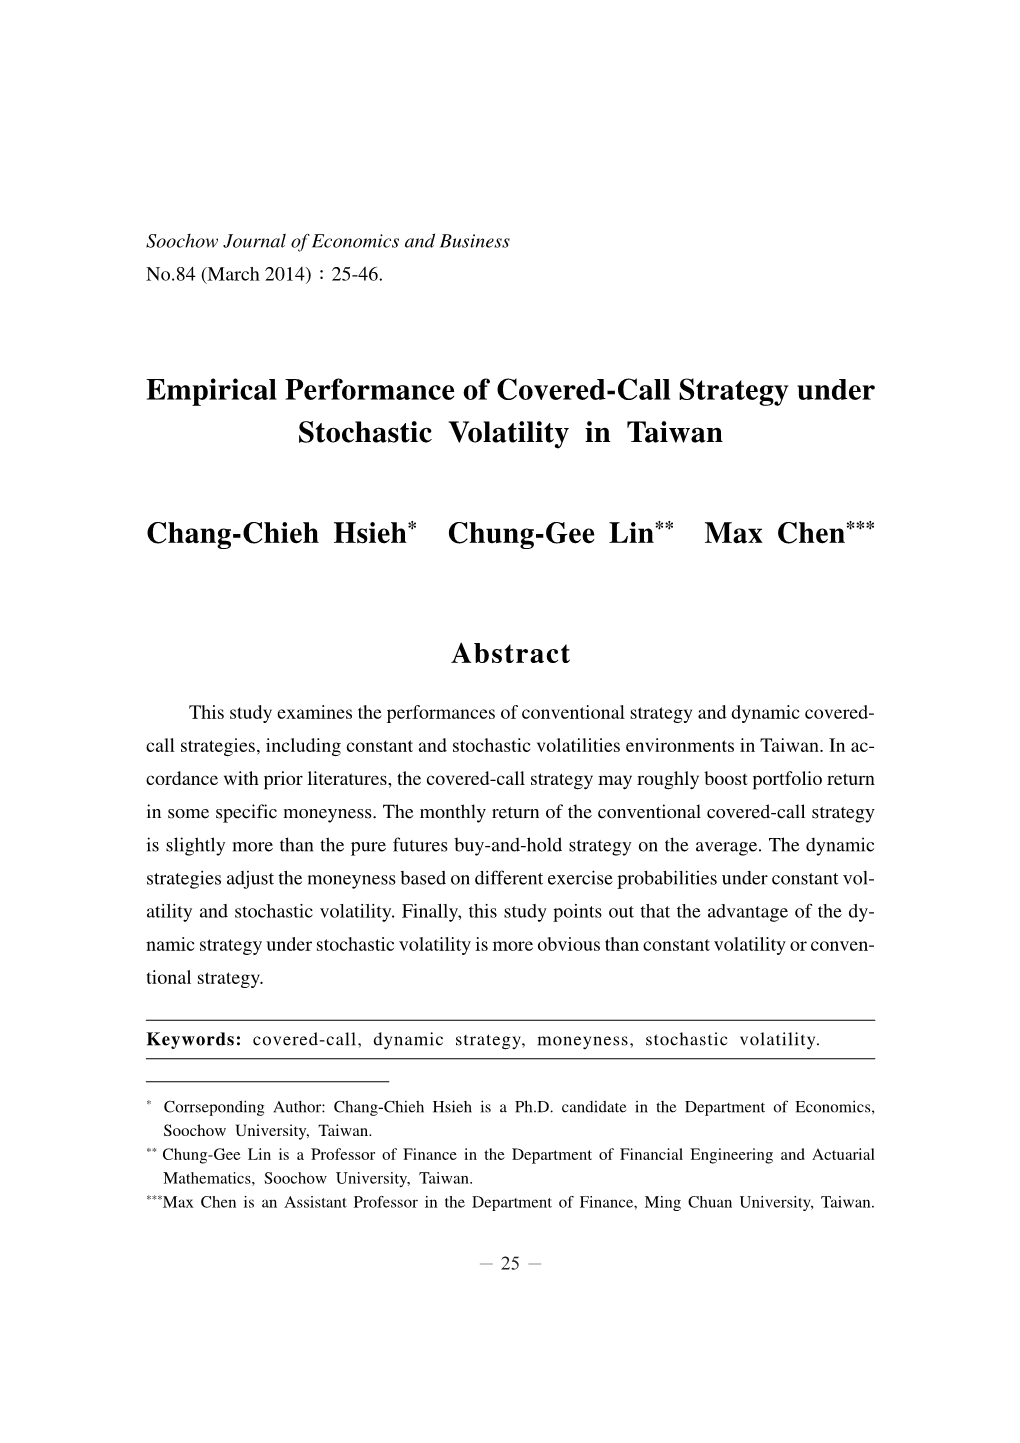 Empirical Performance of Covered-Call Strategy Under Stochastic Volatility in Taiwan